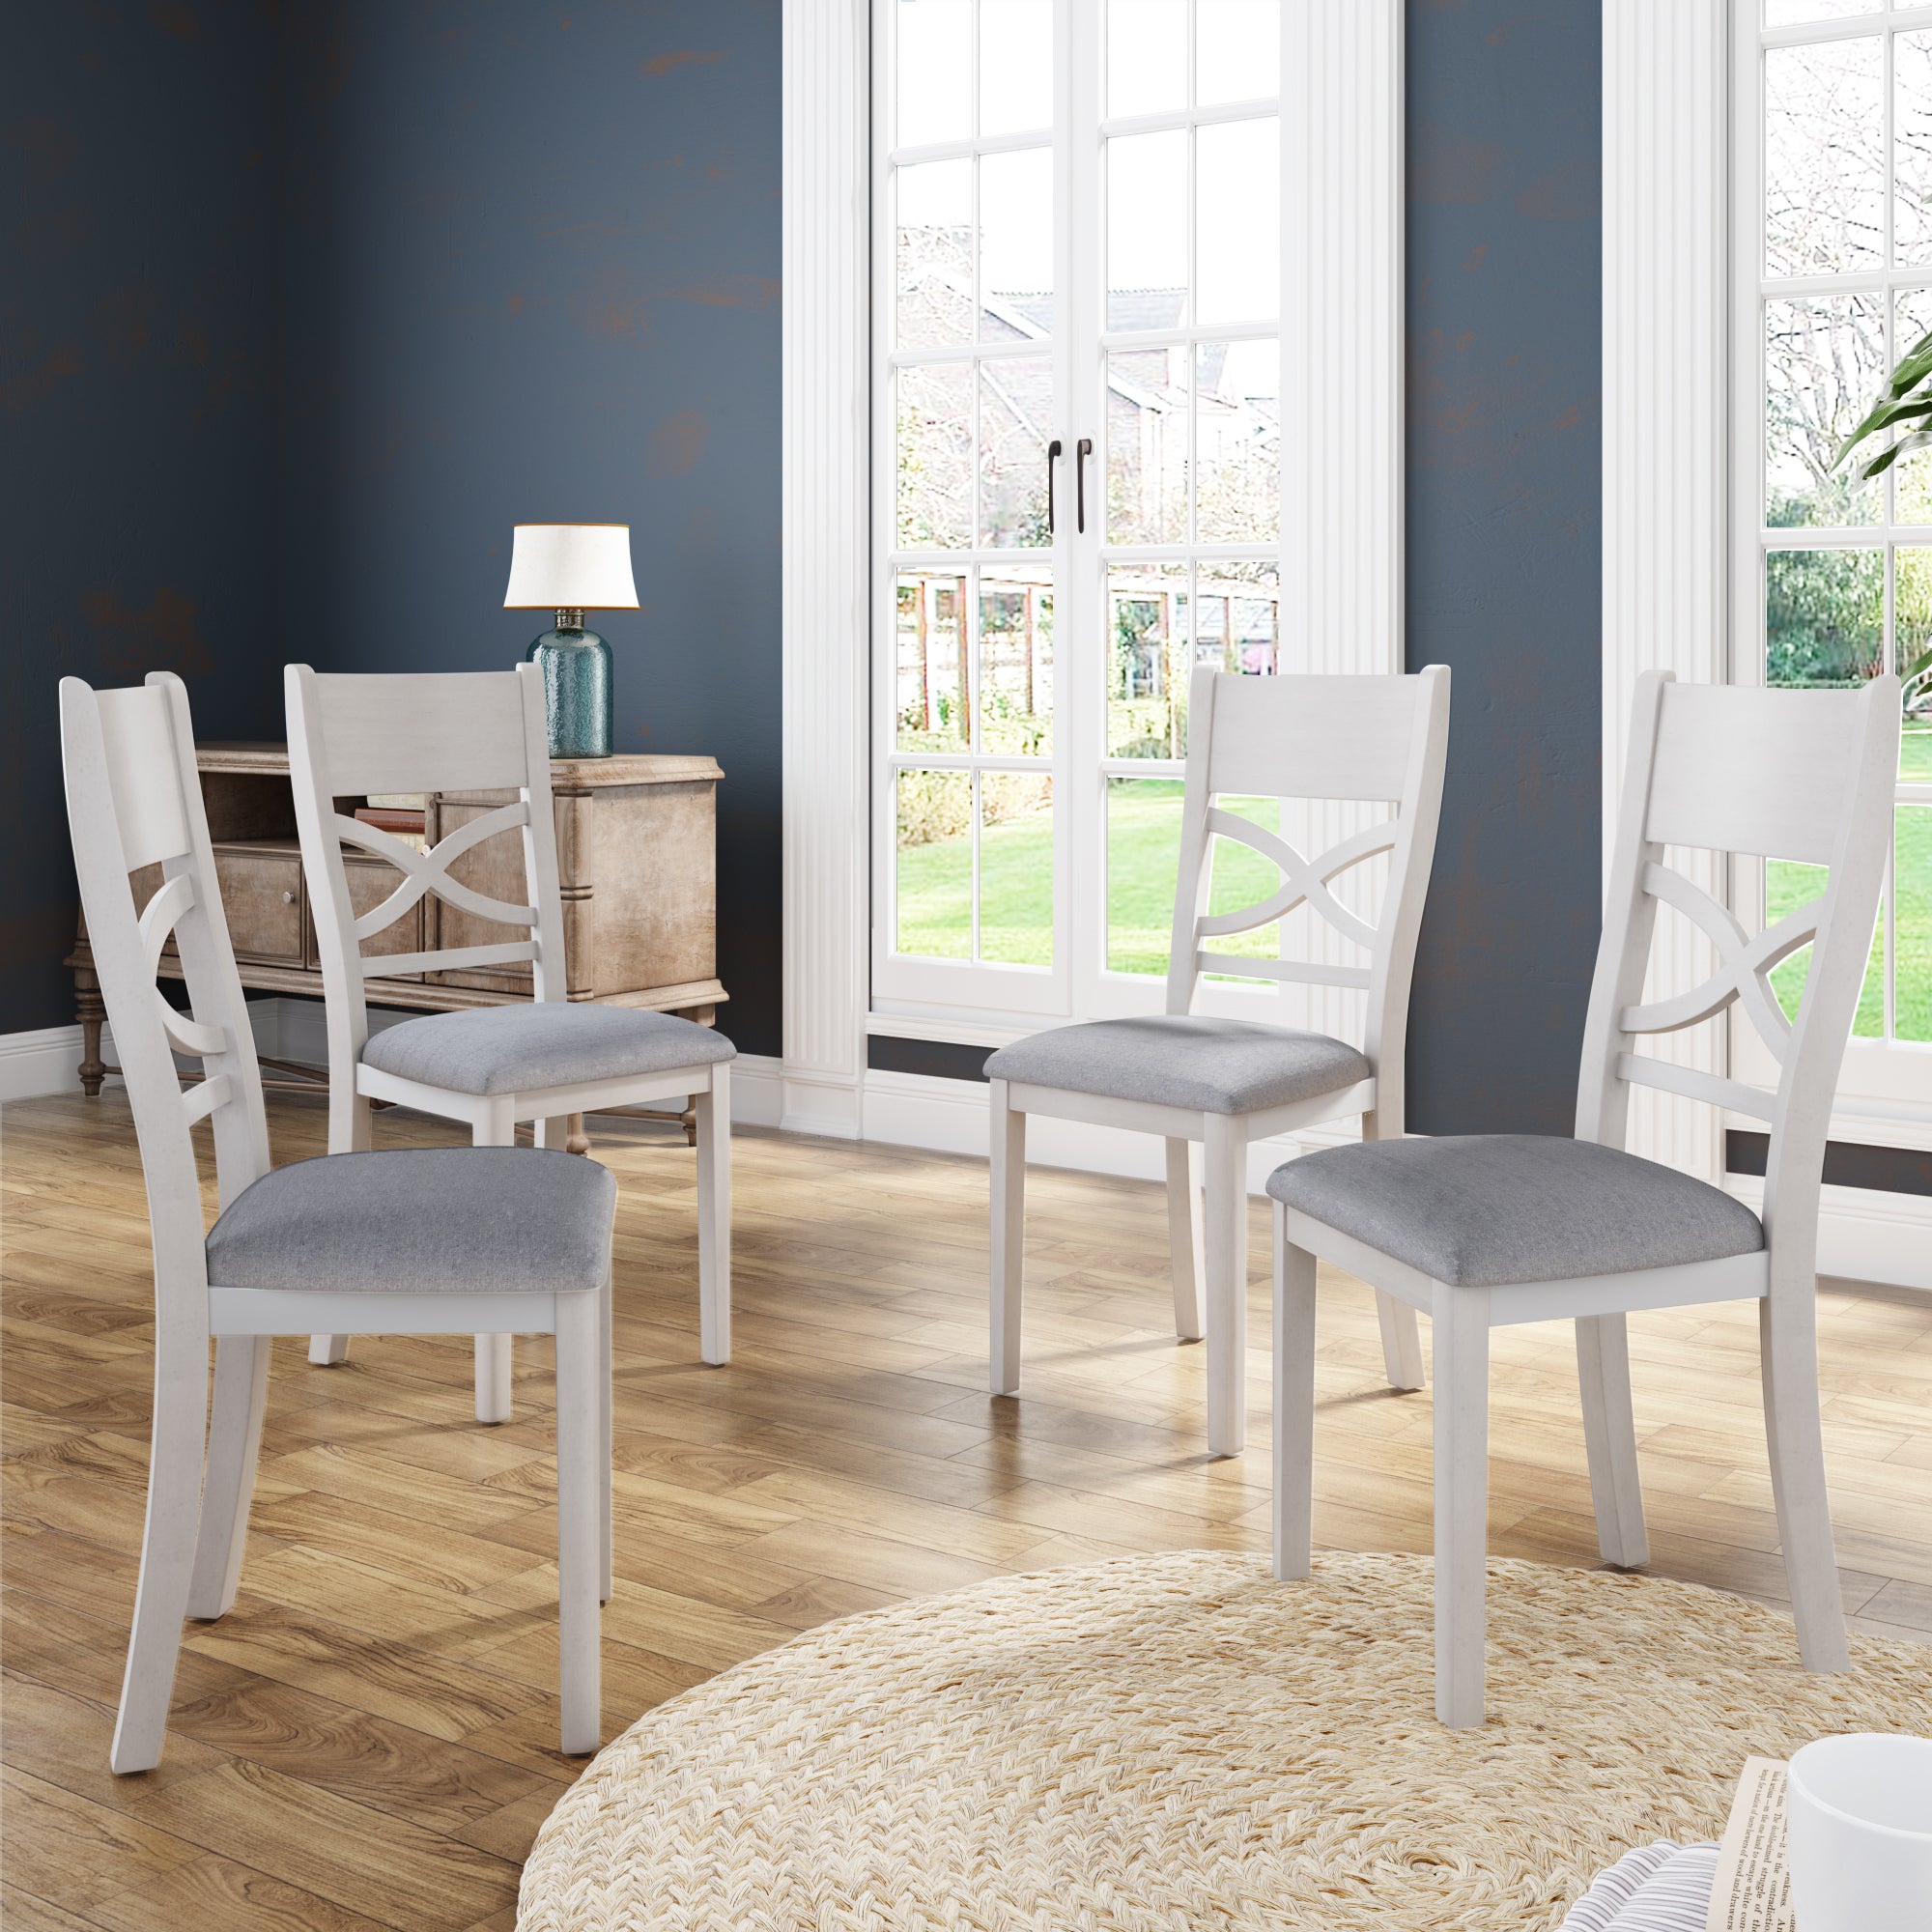 Farmhouse Rustic Wood 5-Piece Kitchen Dining Table Set with 4 Upholstered Padded Chairs, Light Gray+White